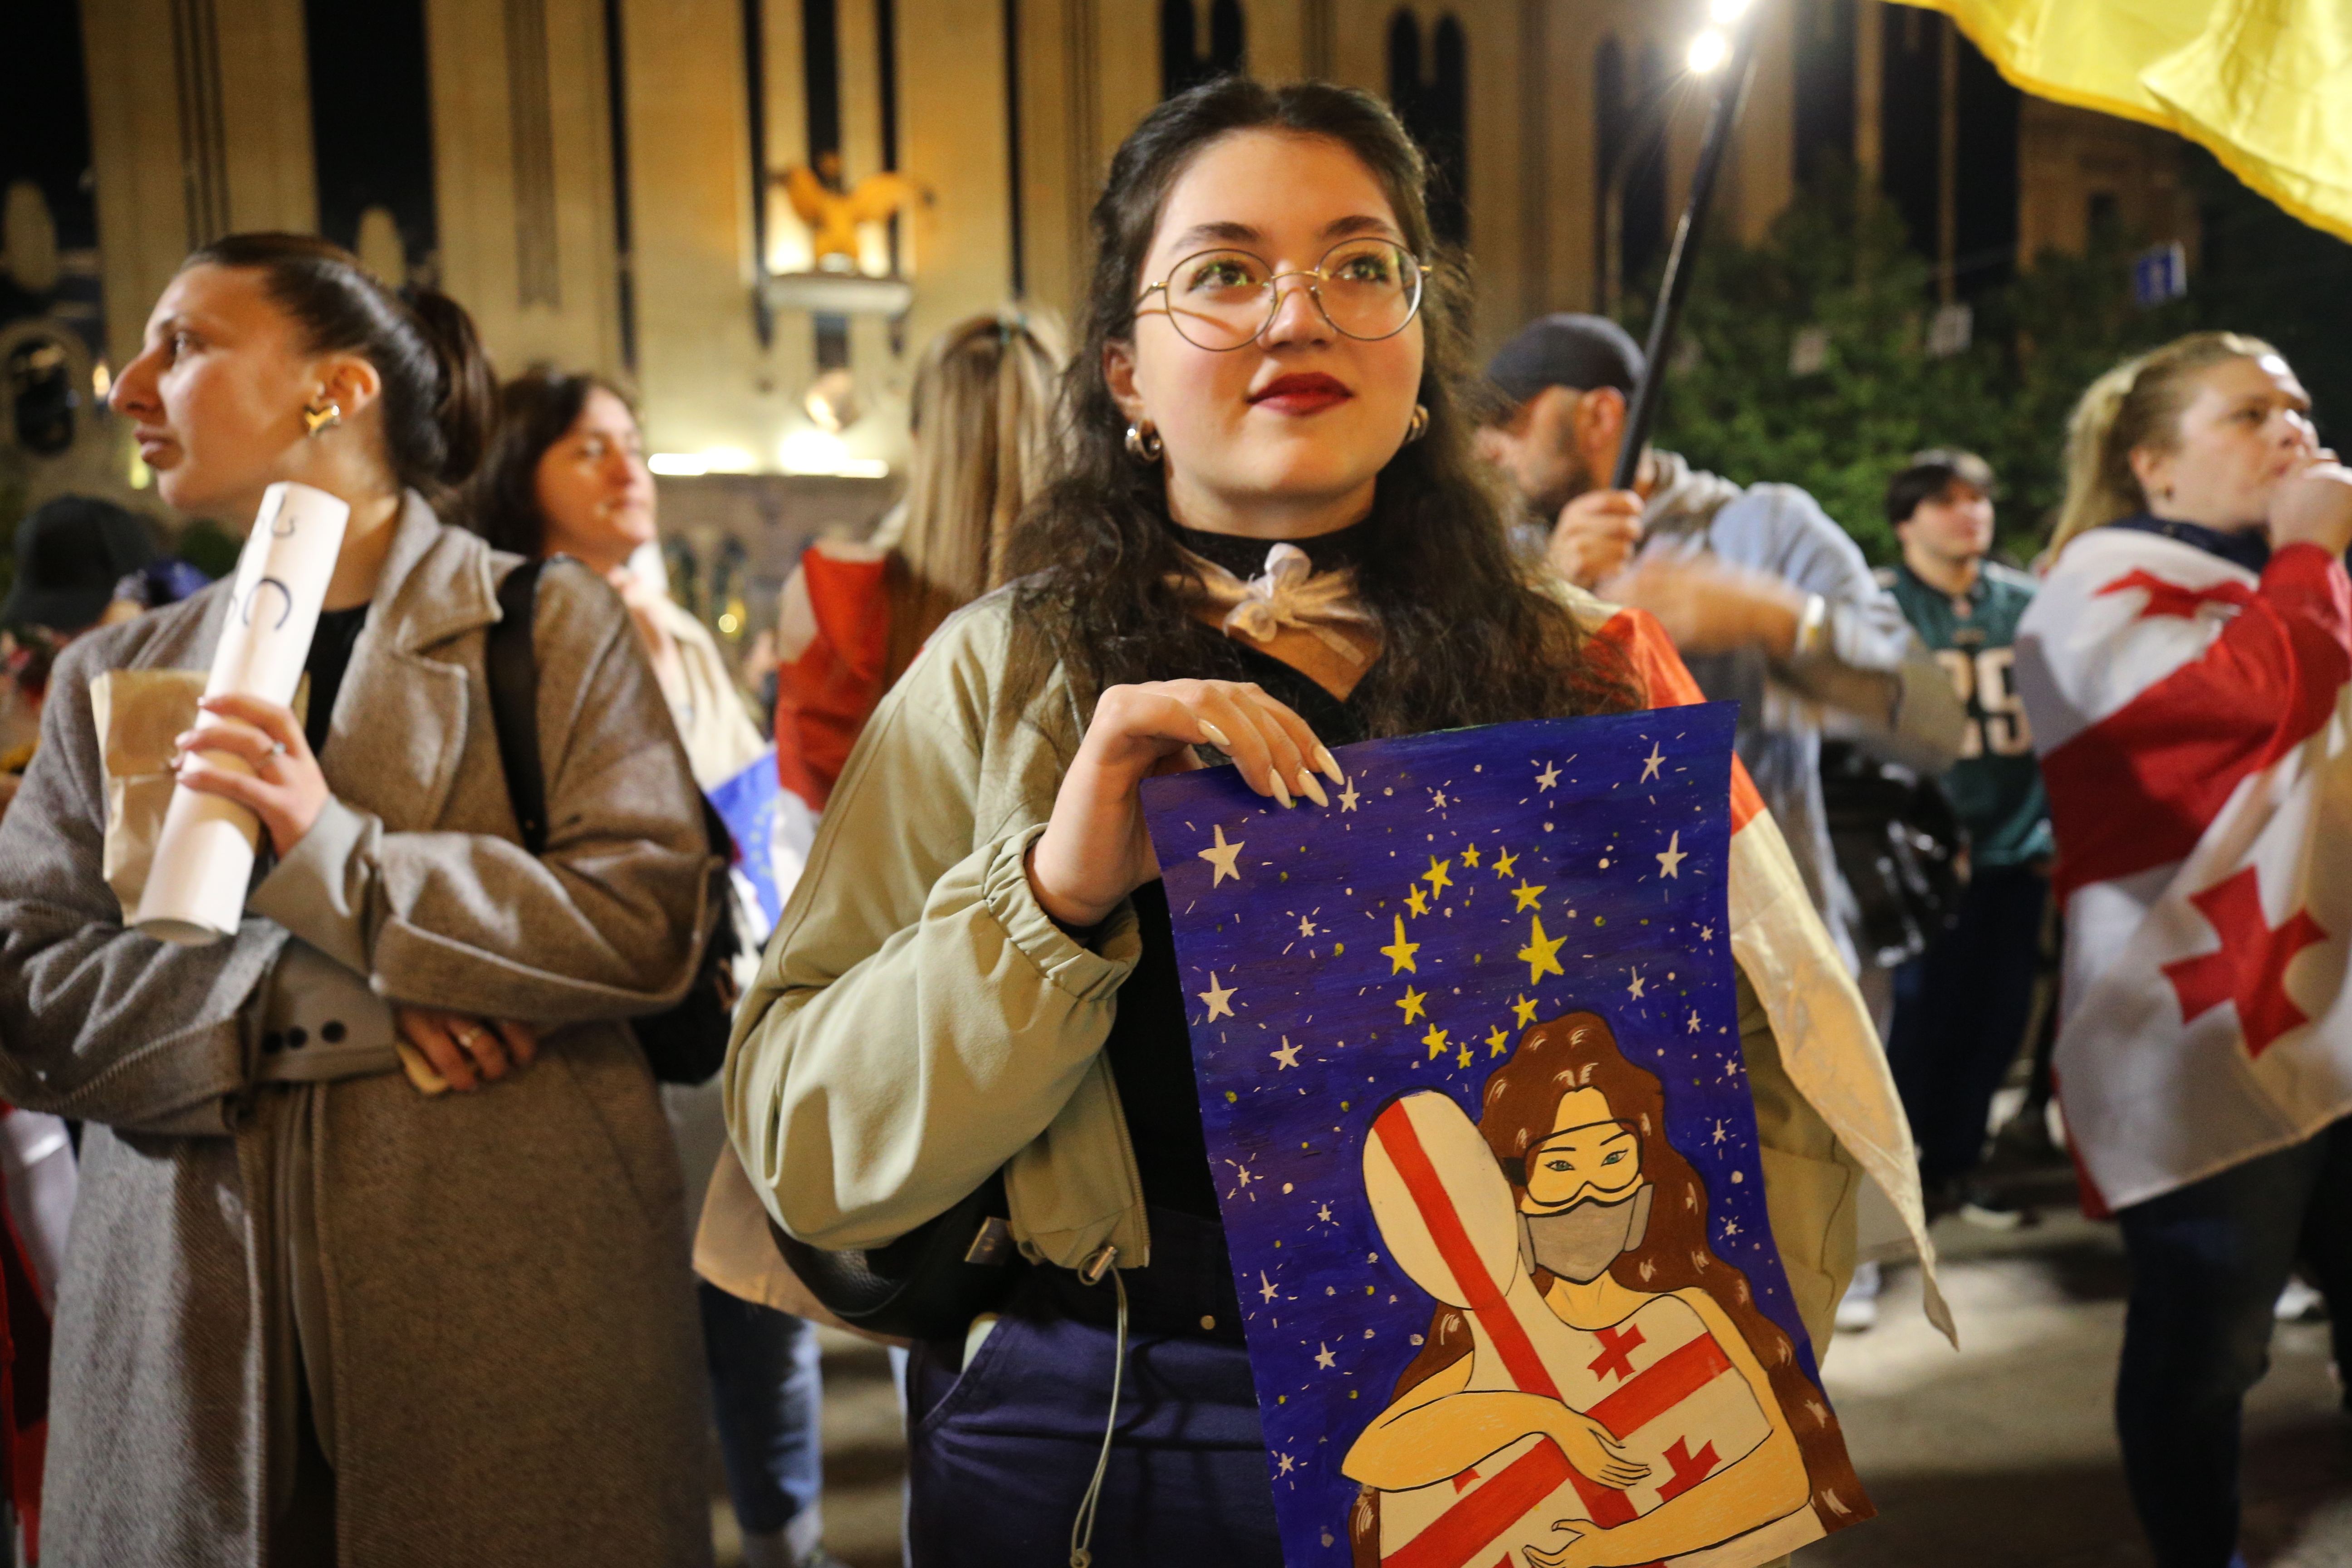 A young woman stands among other demonstrators and holds up a poster showing two embracing figures, one of them with a Georgian flag, against a blue night sky and EU stars.